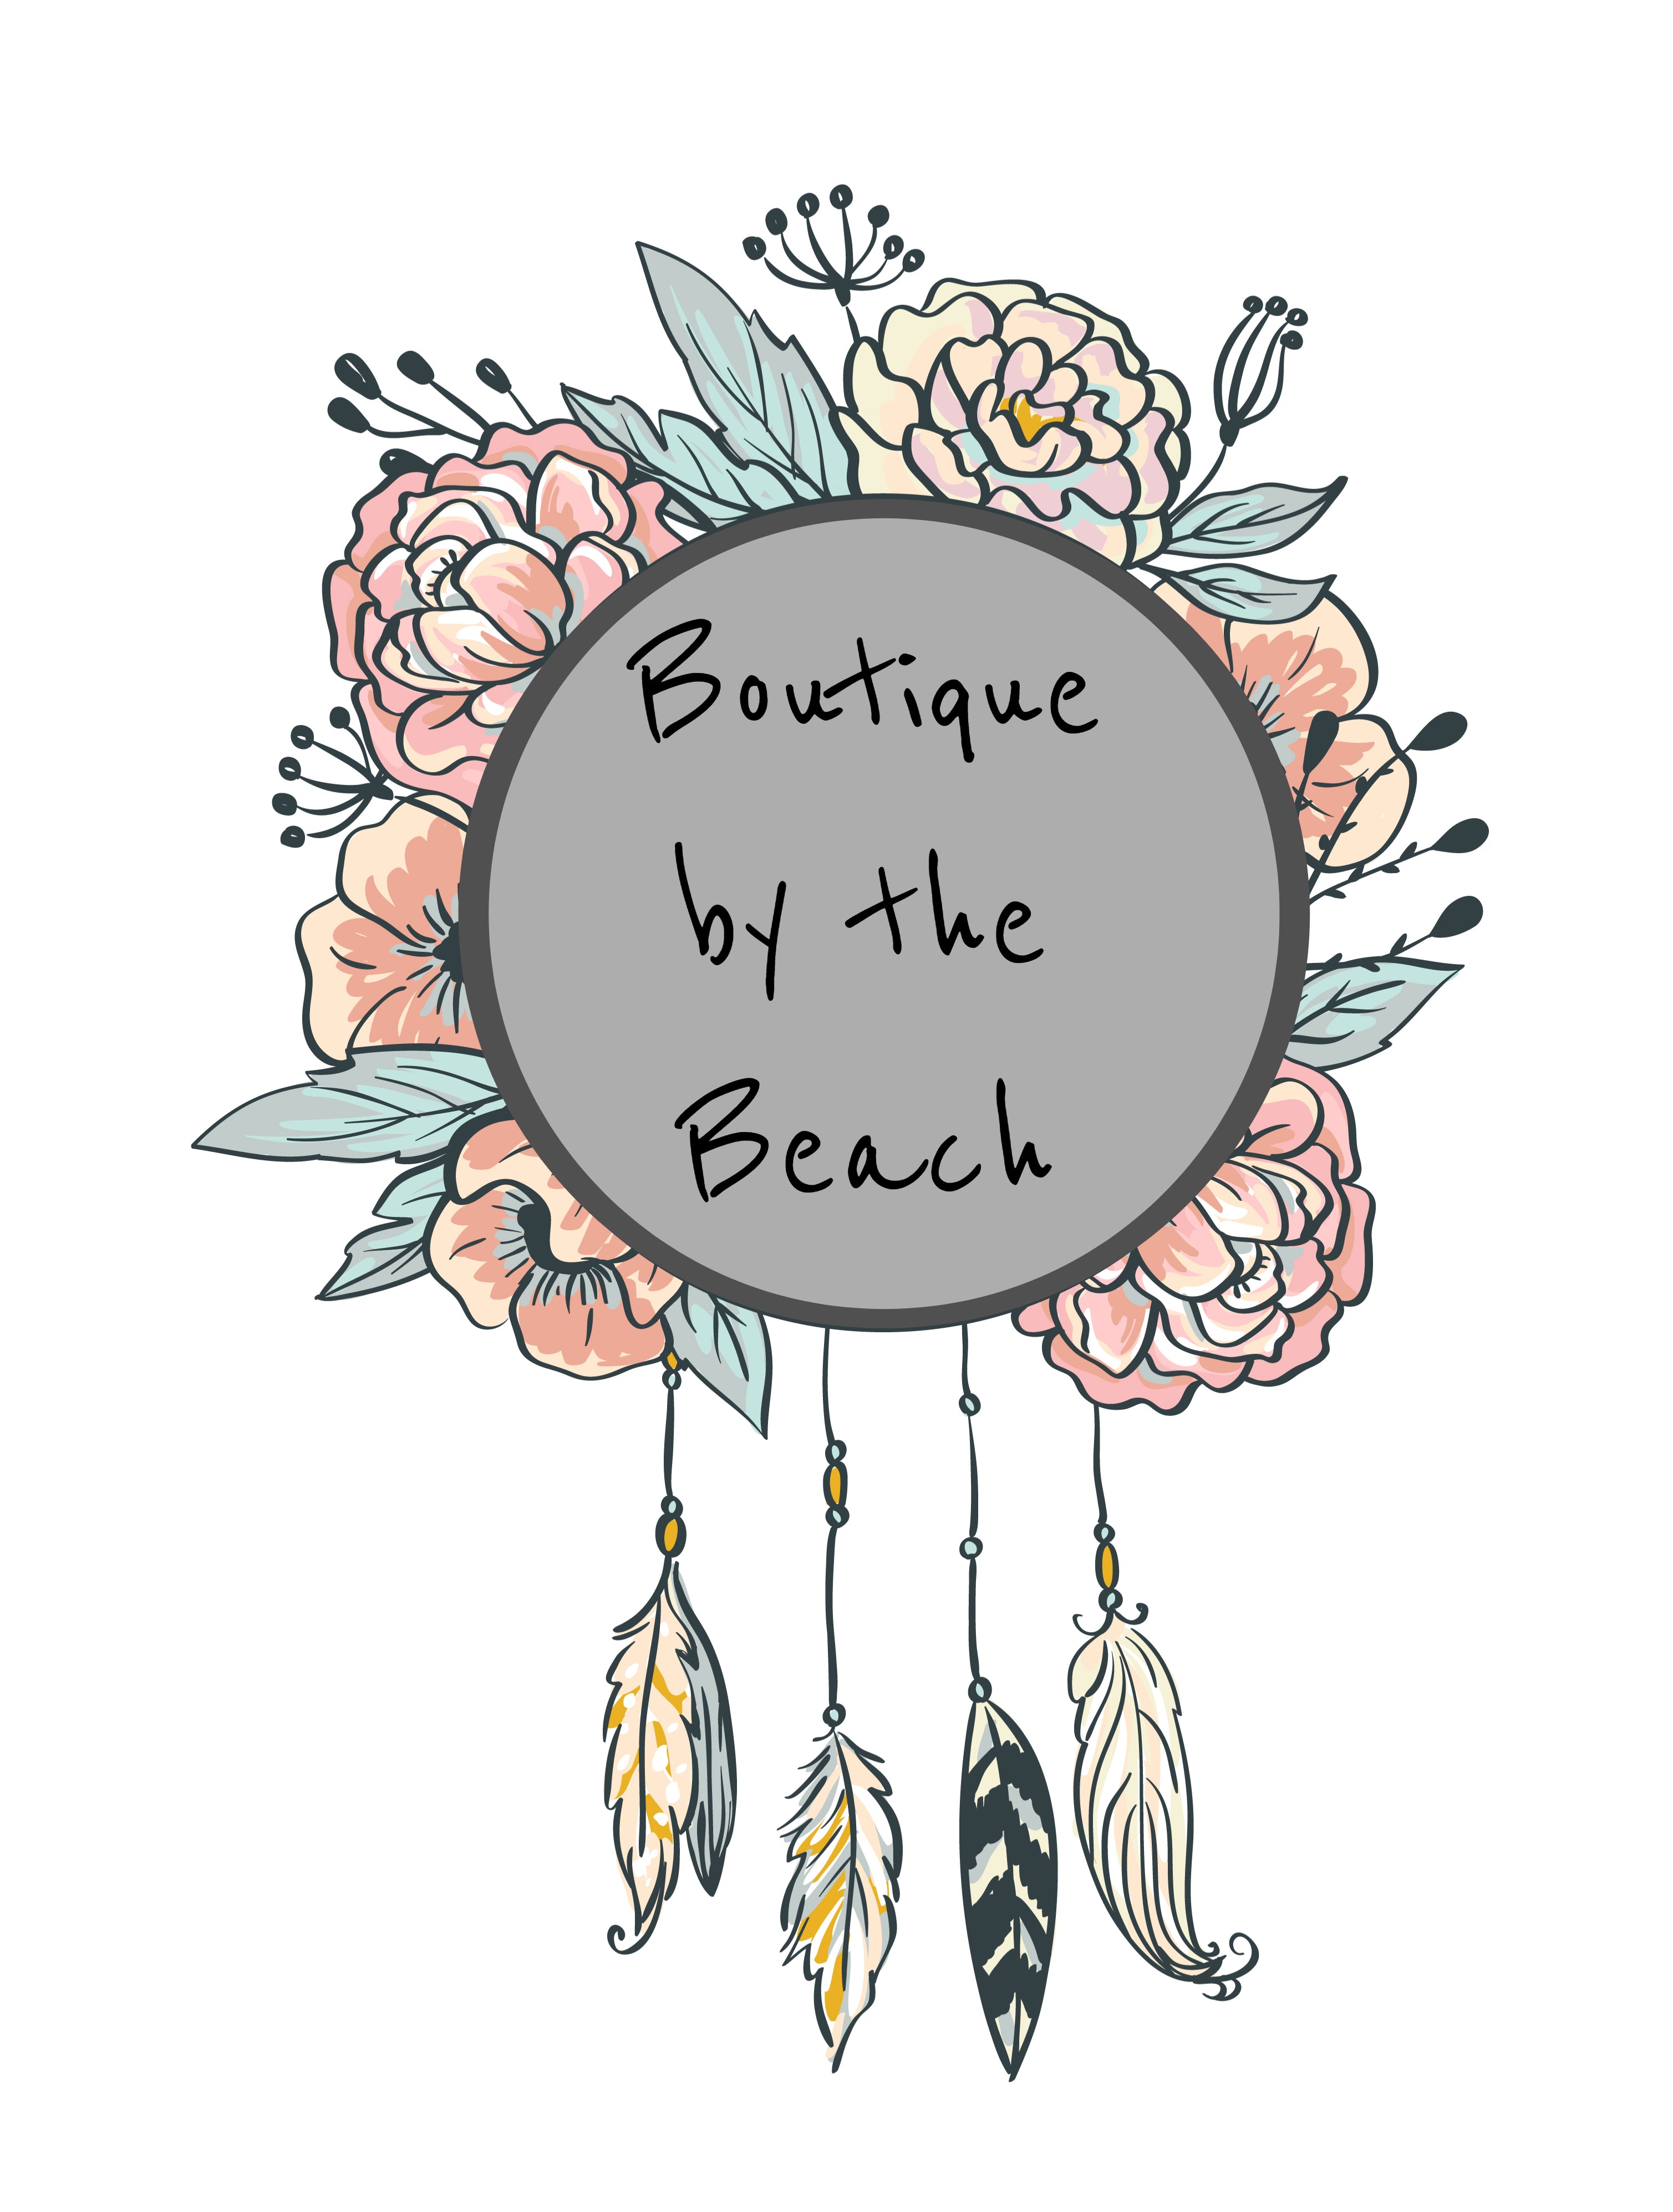 Boutique by the Beach NZ